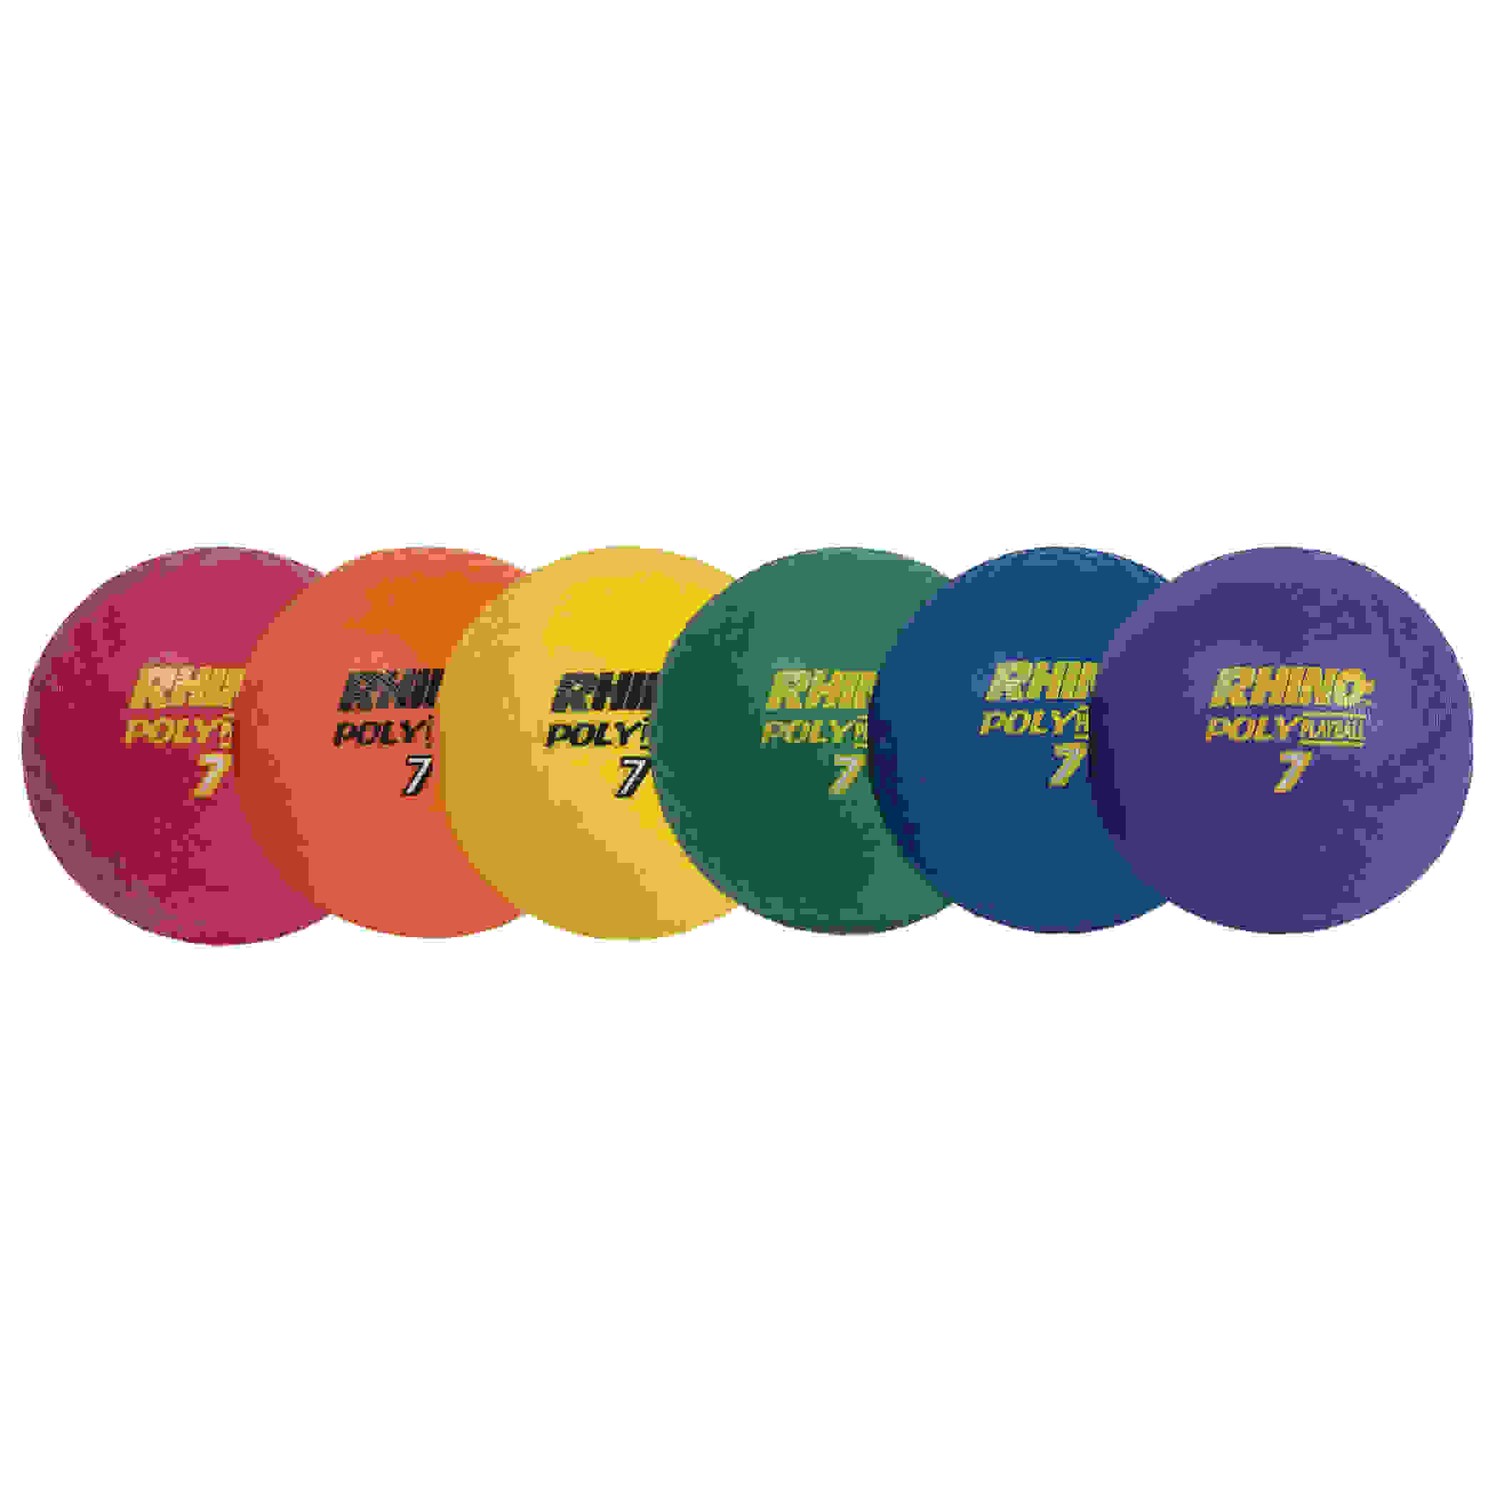 Rhino Poly 7" Playground Ball Set, Assorted Colors, Set of 6